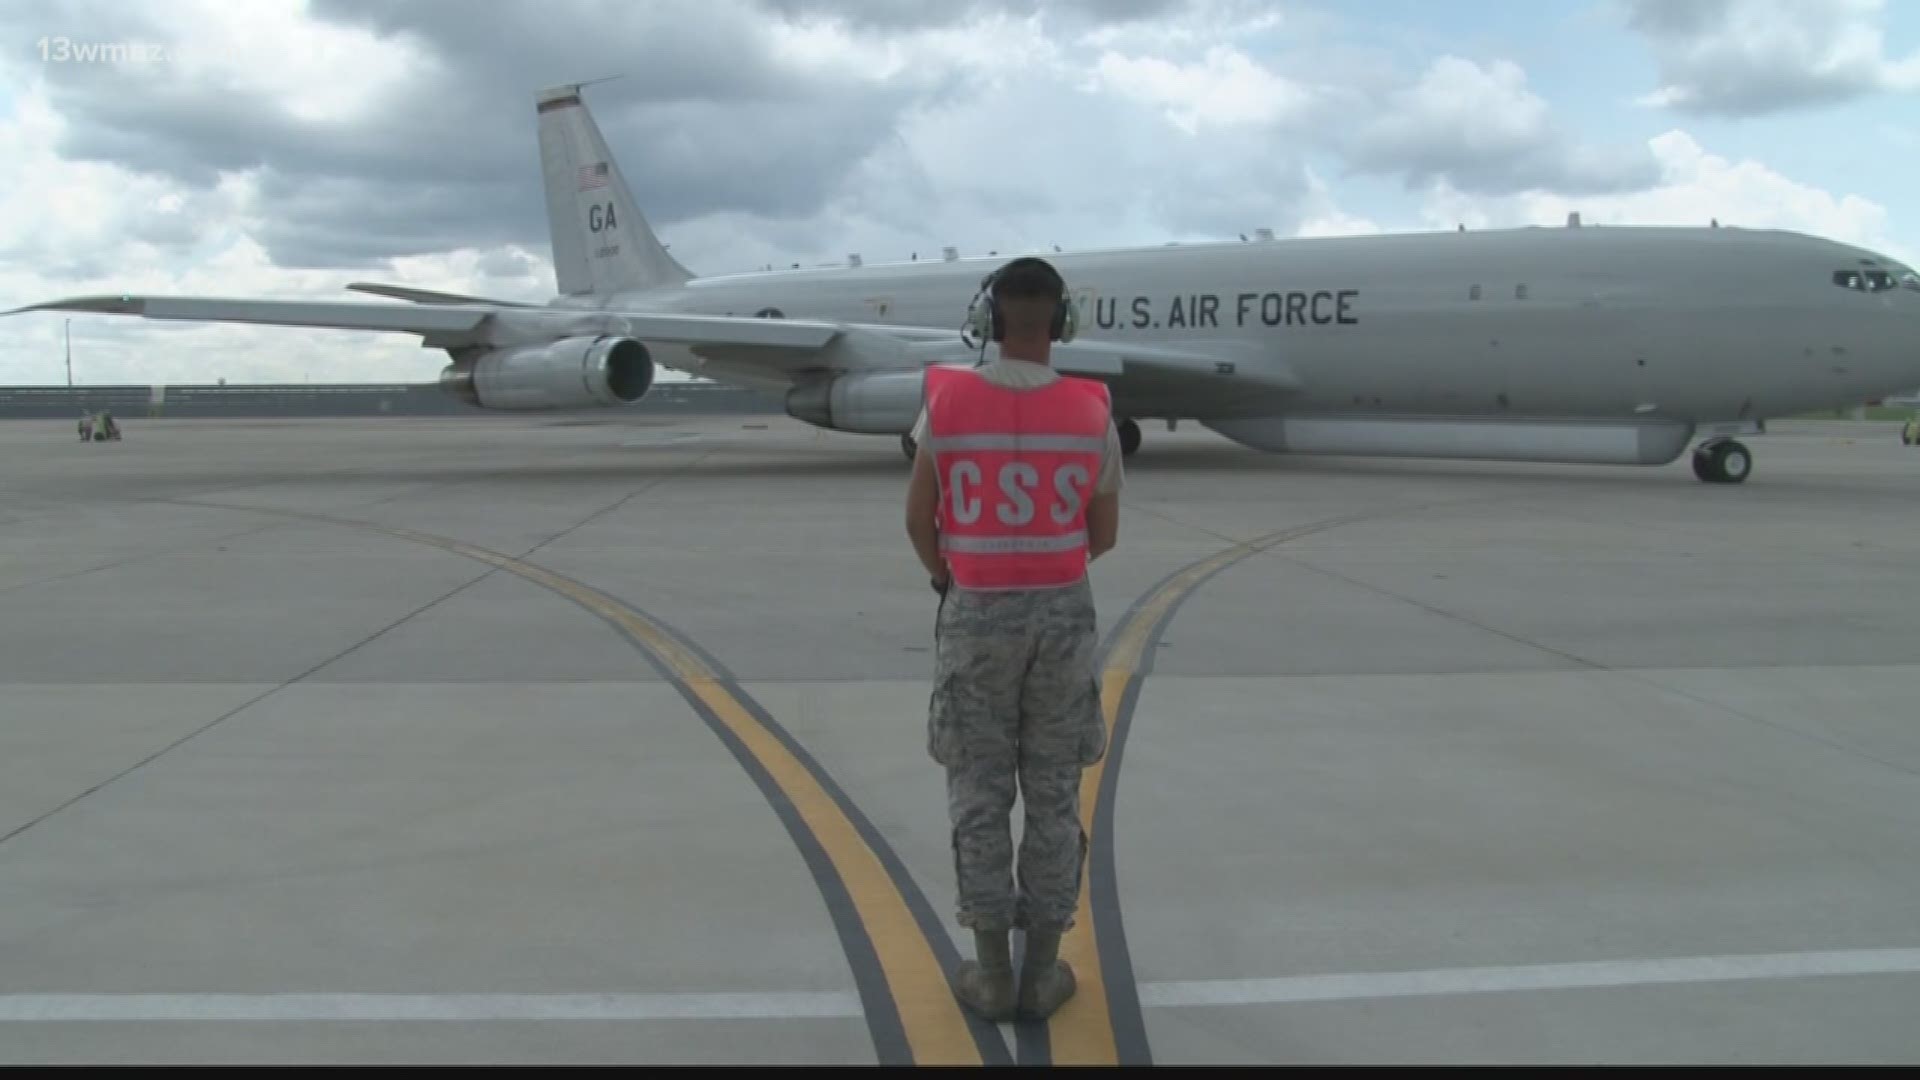 Robins Air Force Base says they're ahead of schedule on their plan to hire 1,200 people in 12 months.